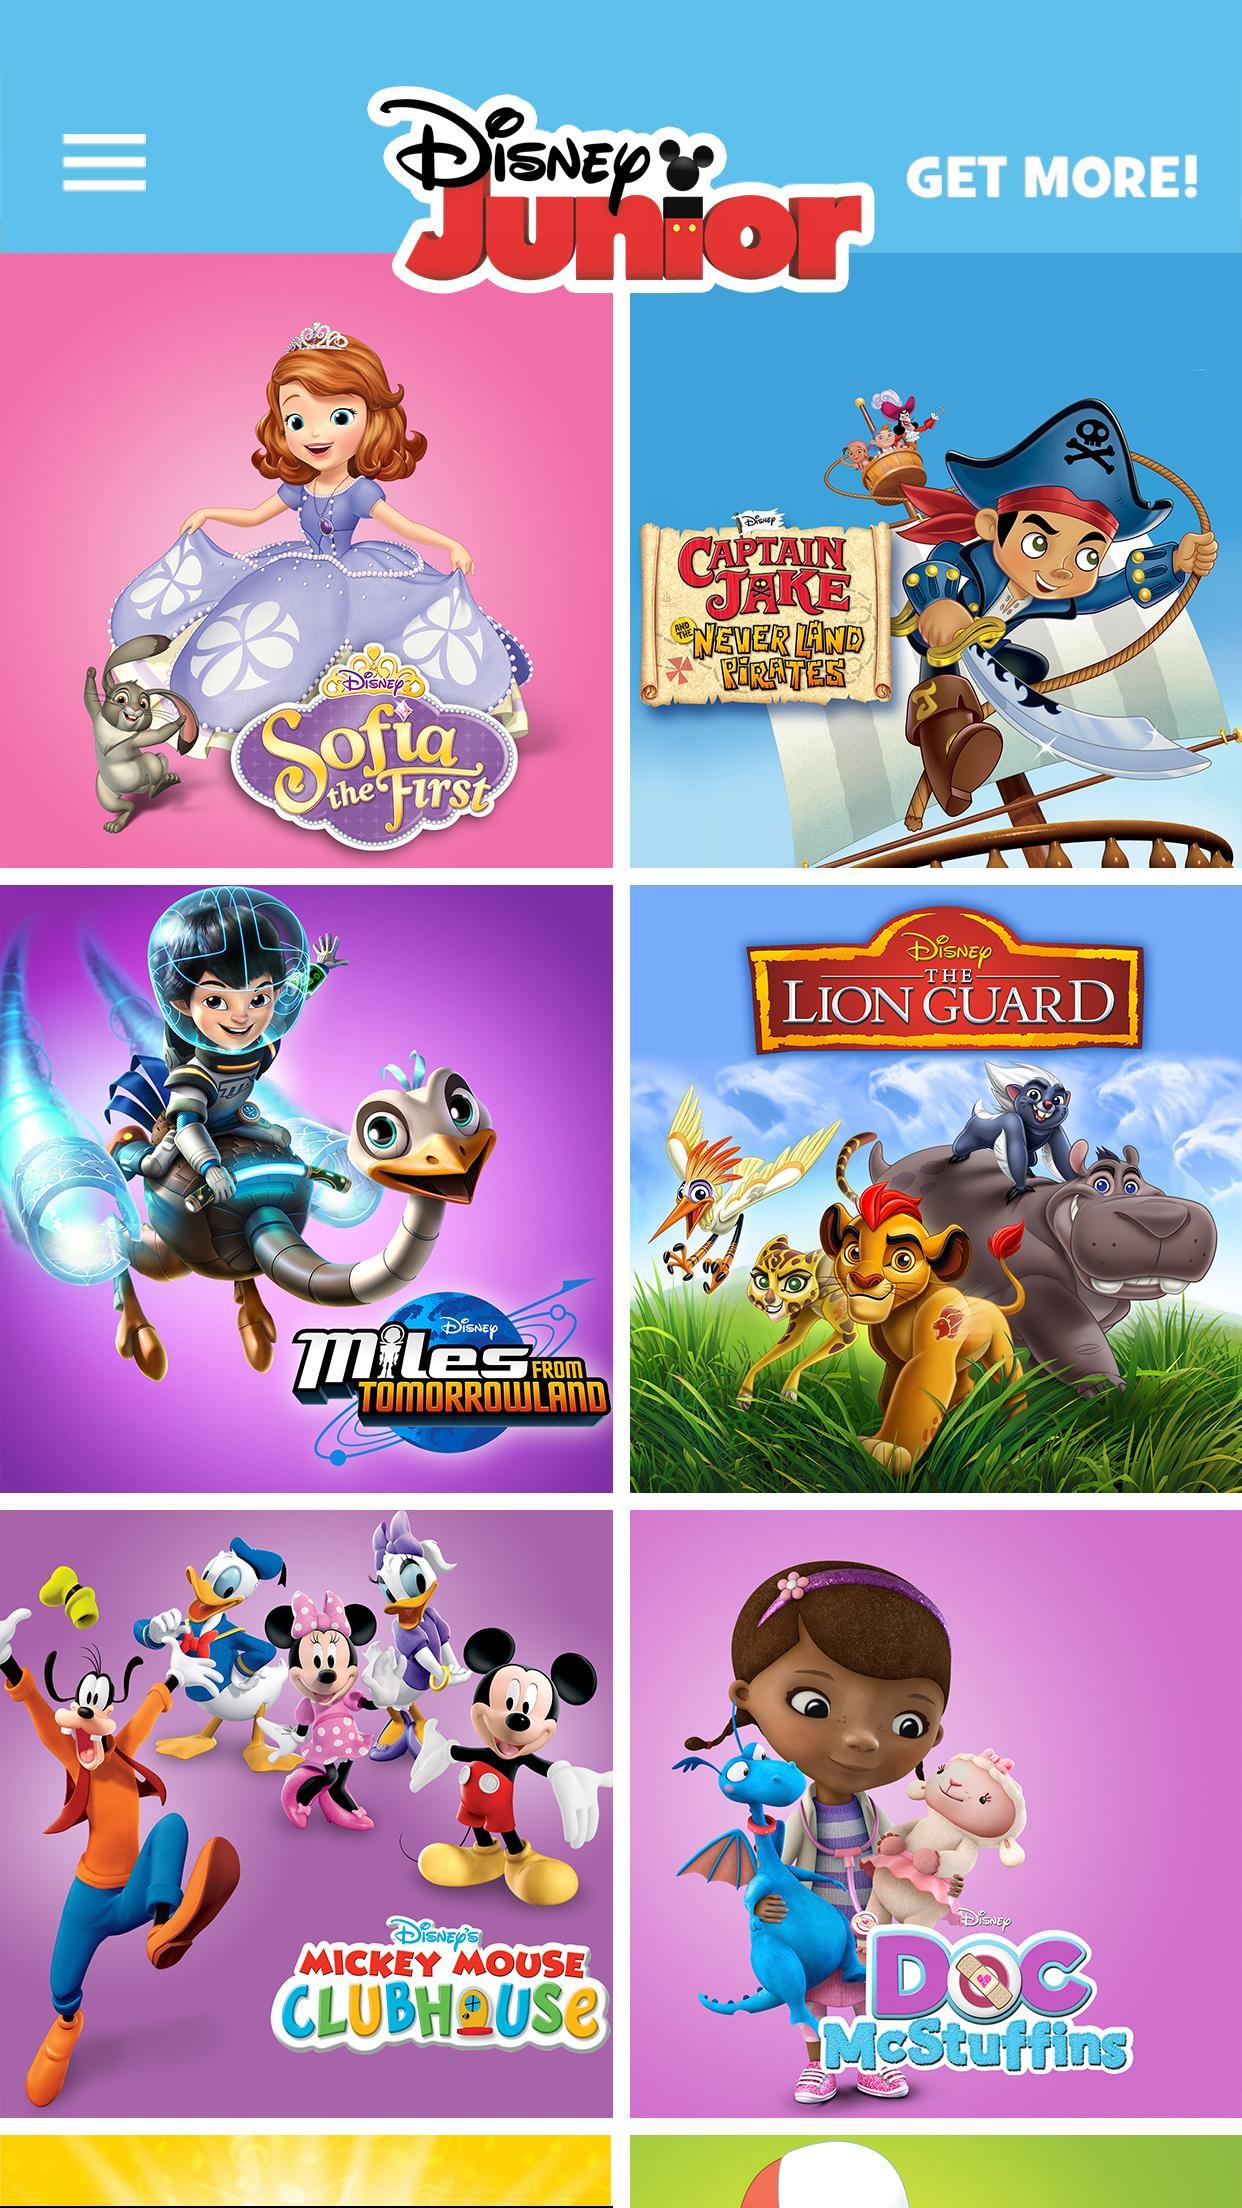 Disney Junior for Android - APK Download